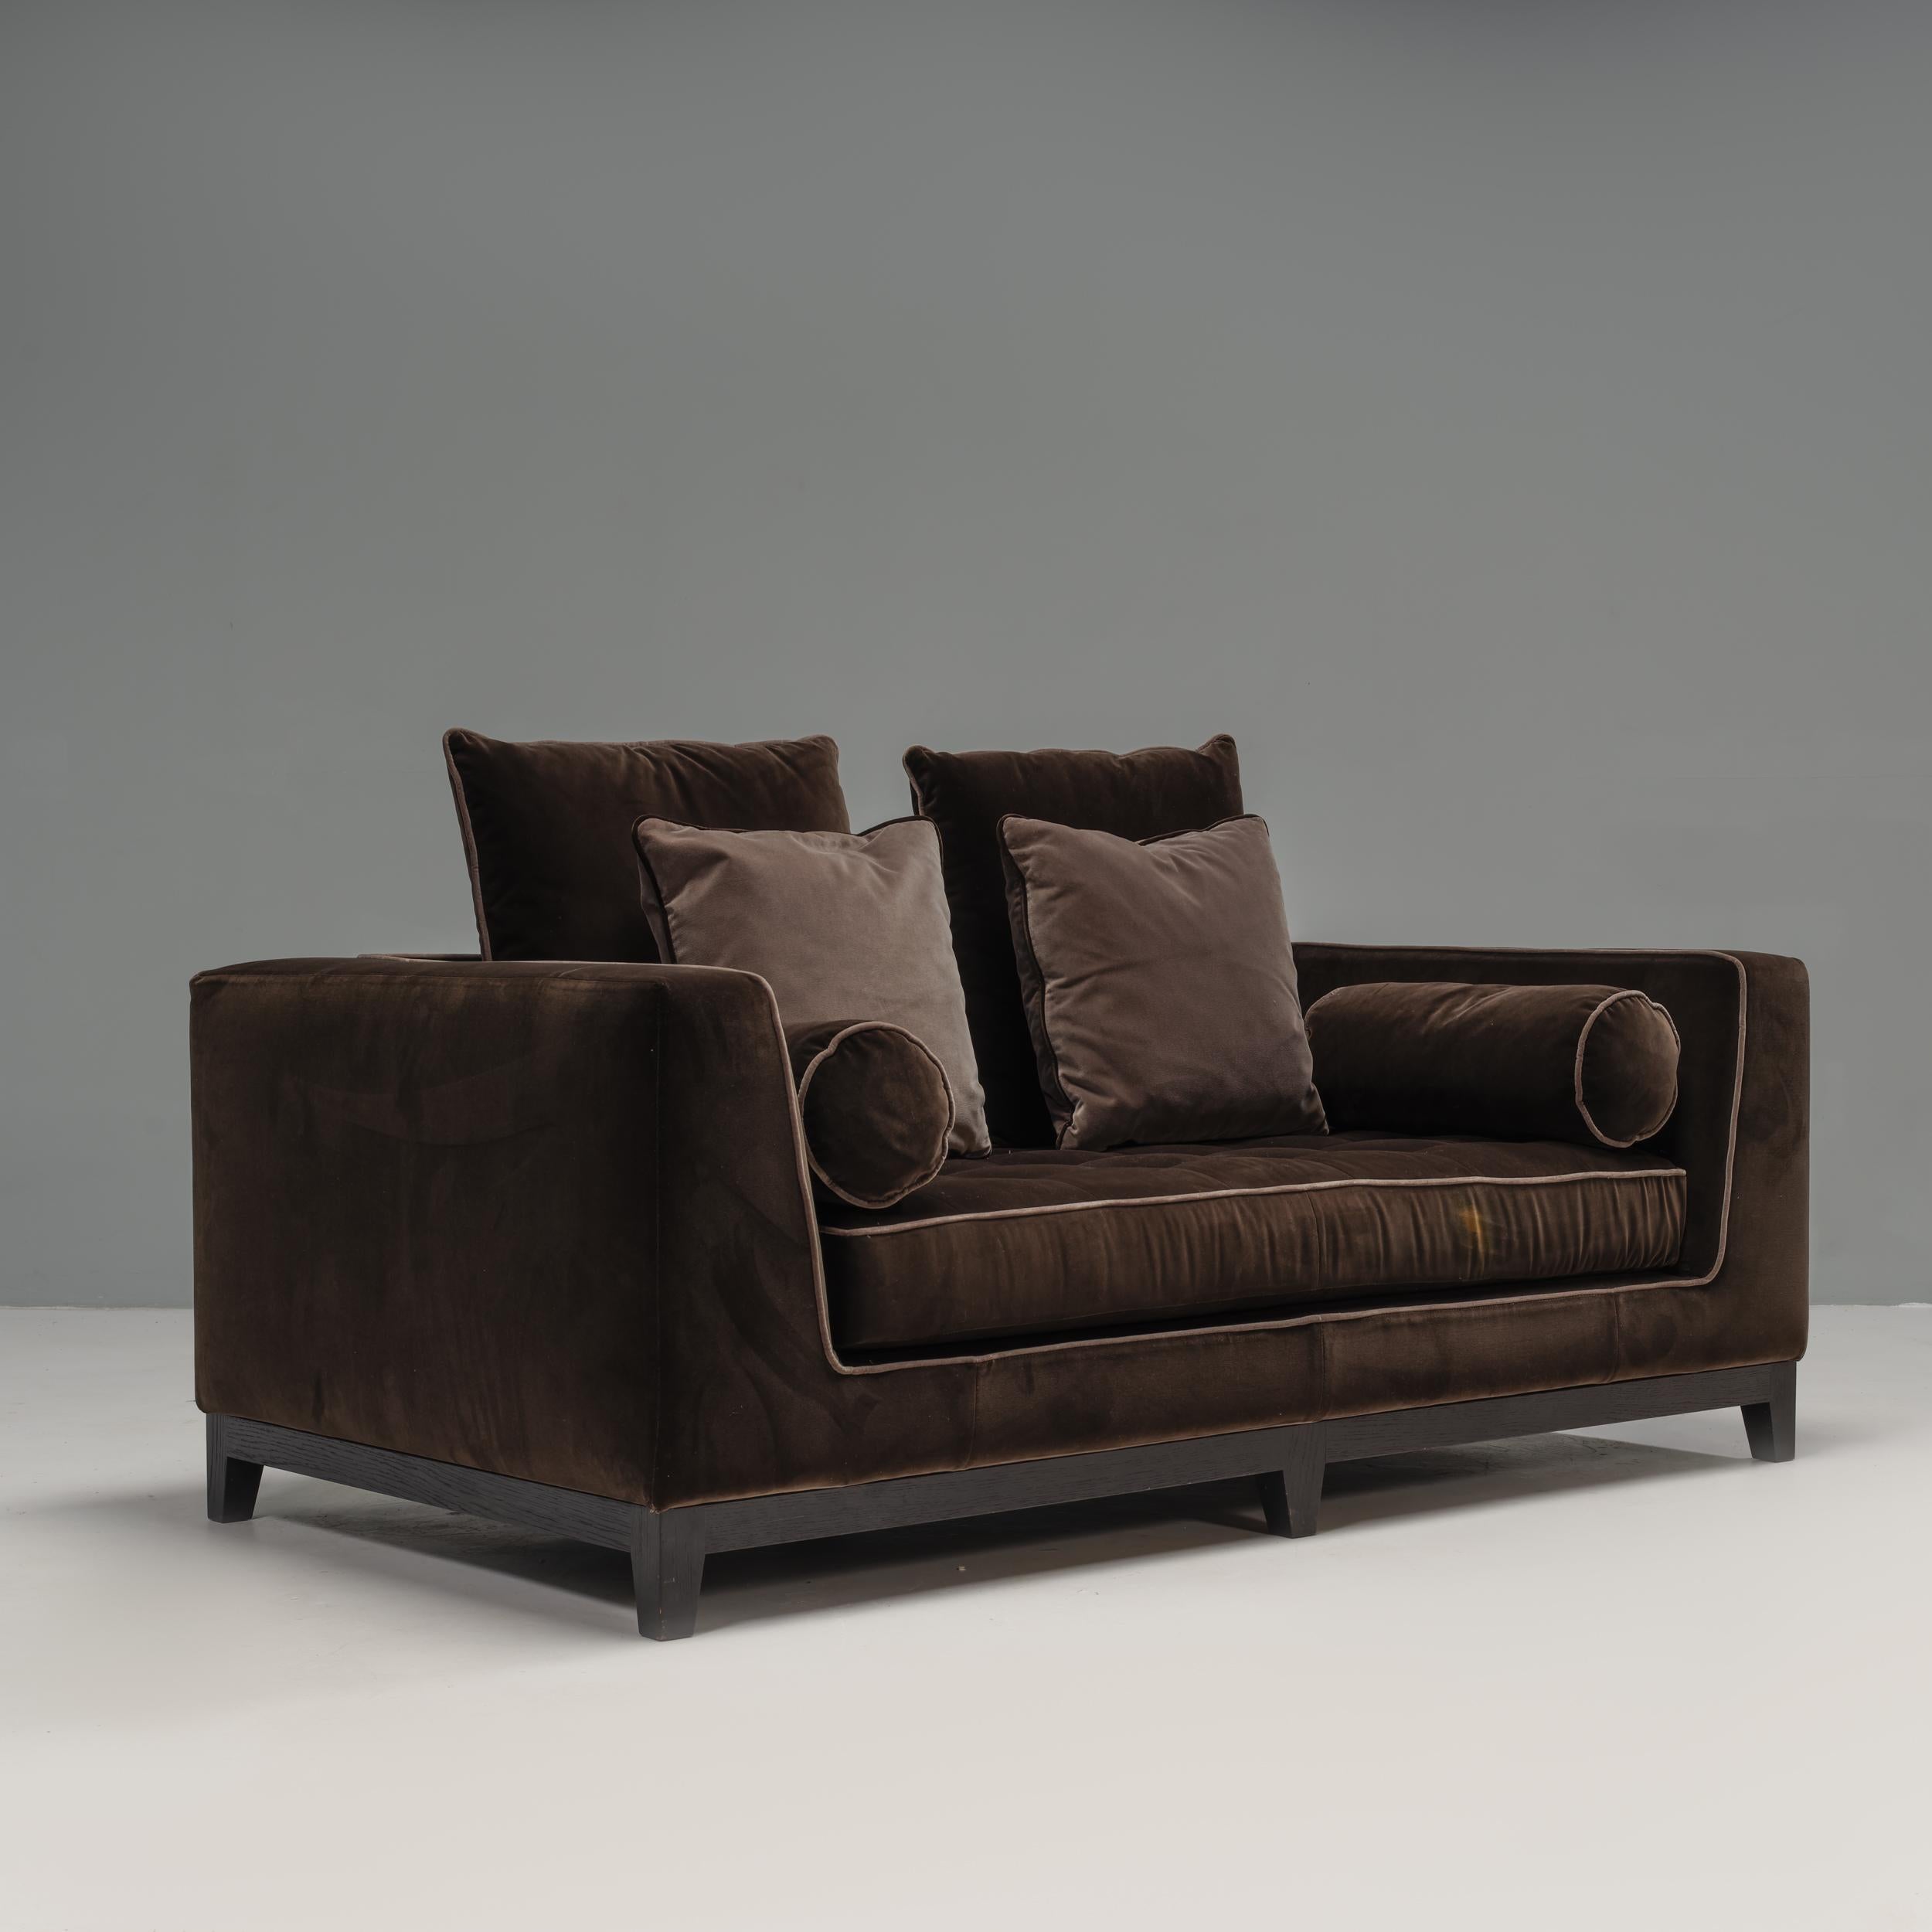 Designed by Antionio Citterio for Maxalto B&B Italia, this two seater sofa seamlessly combines modern and traditional design.

Featuring a square frame sitting on a brushed black oak base, the armrests are integrated into the backrest creating a